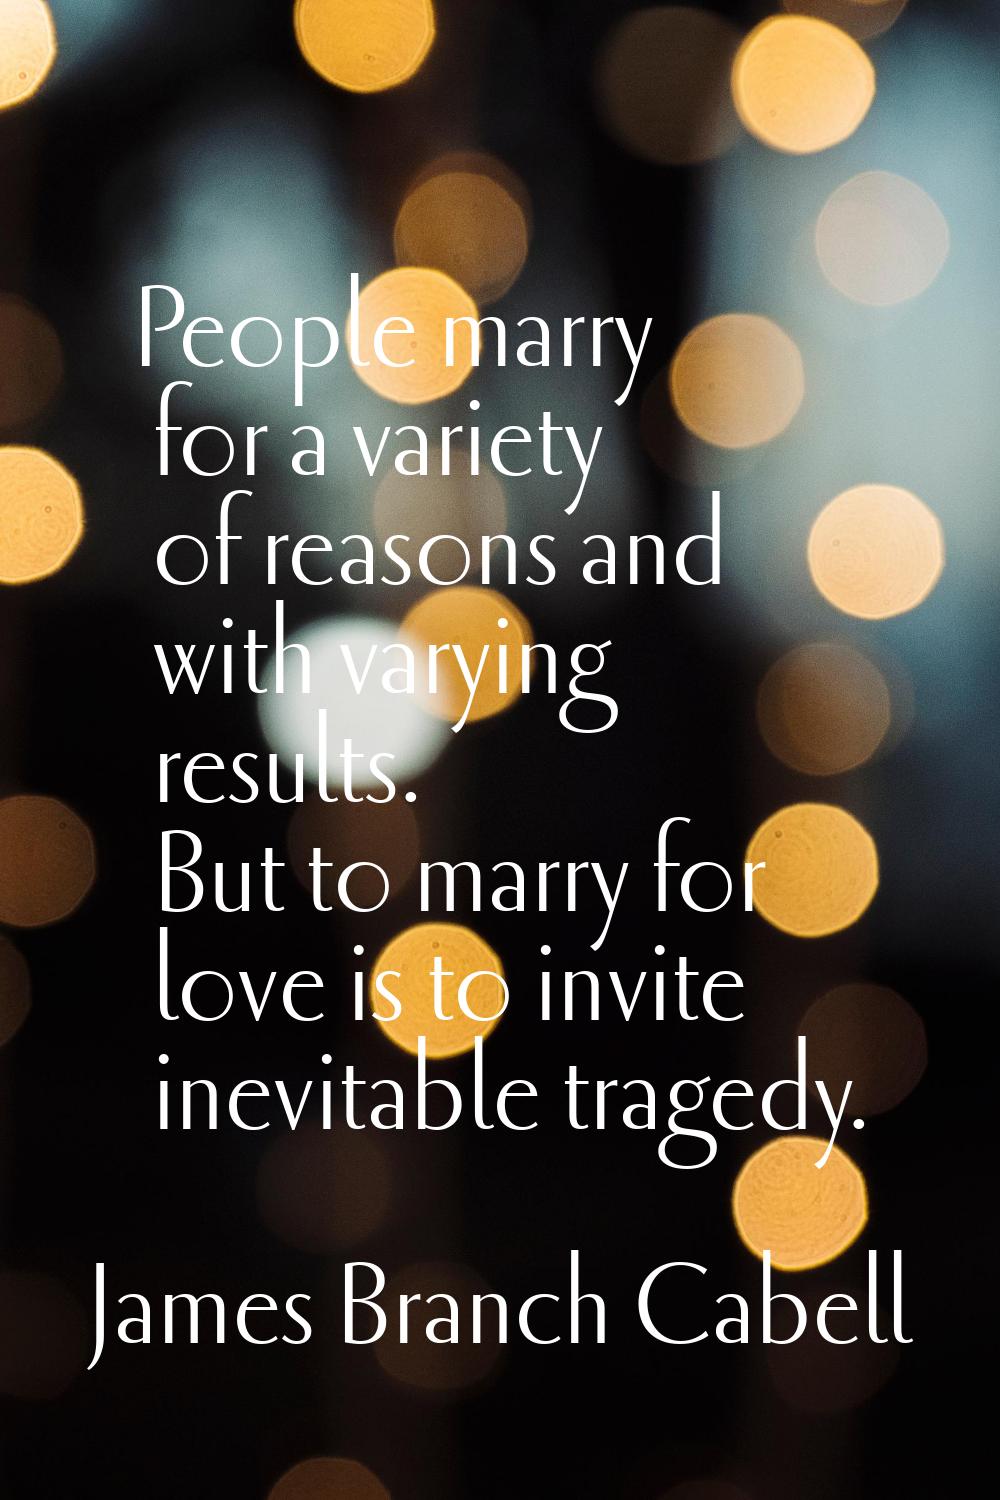 People marry for a variety of reasons and with varying results. But to marry for love is to invite 